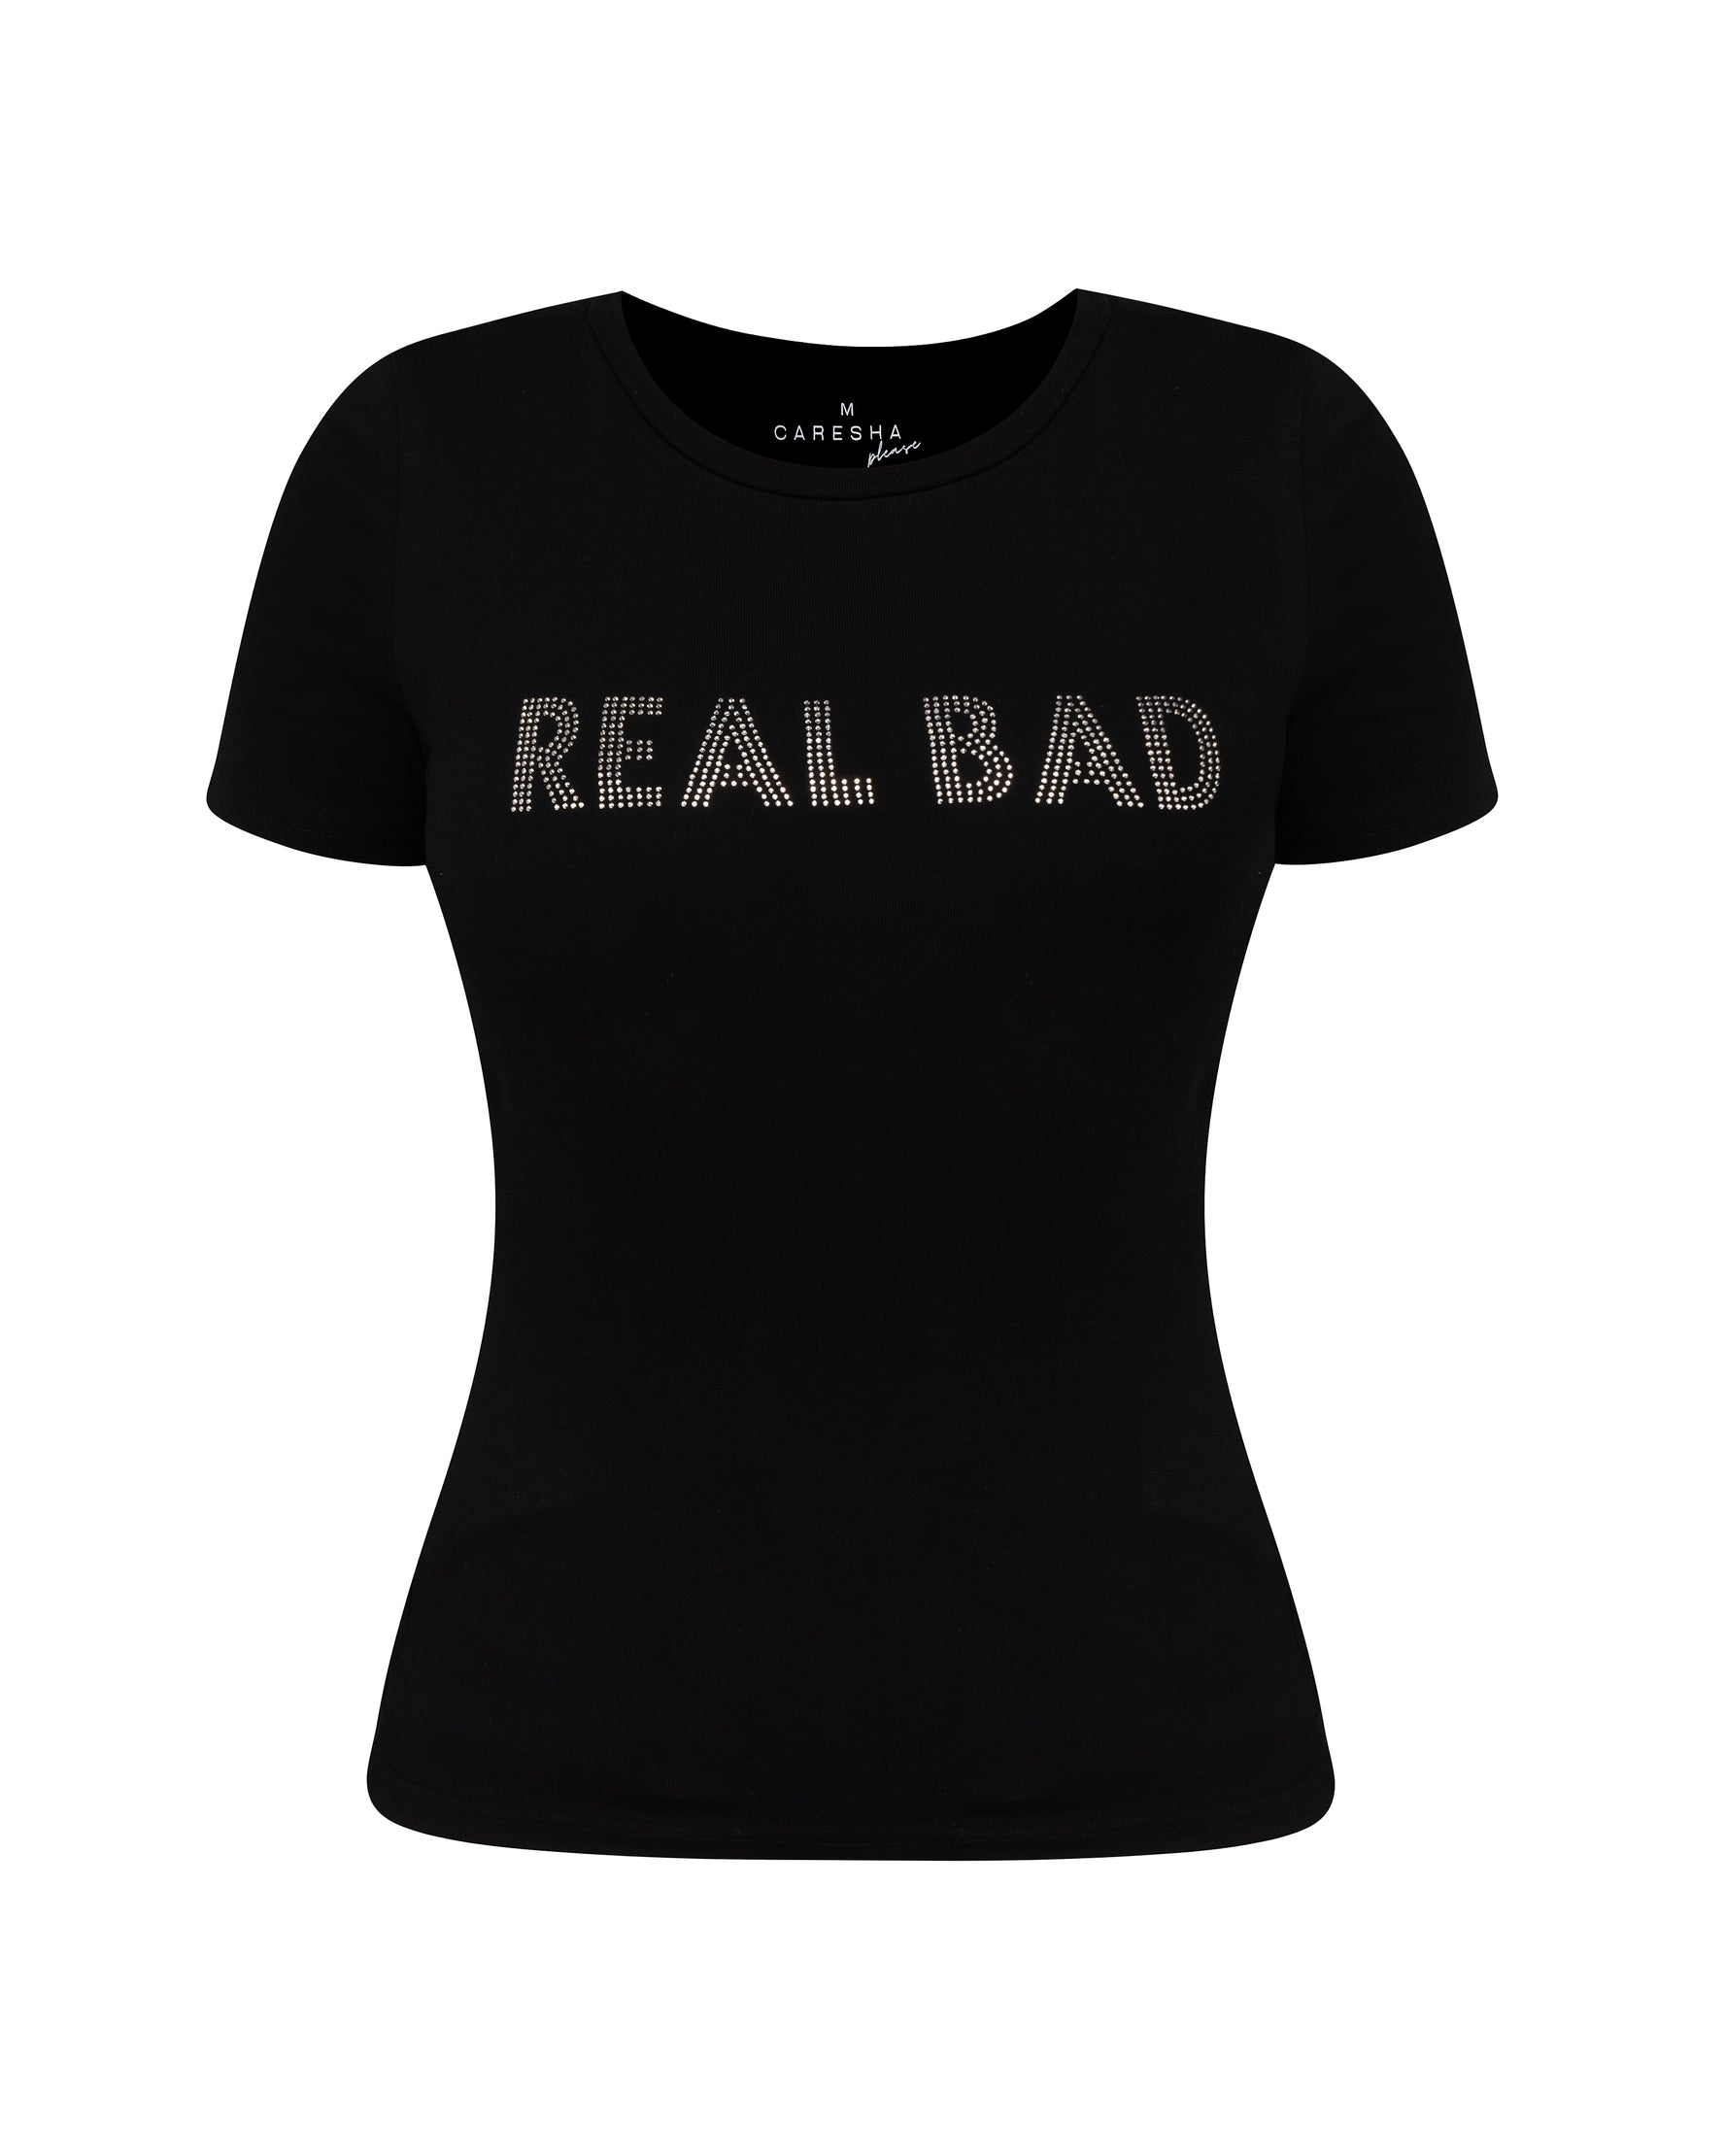 Real Bad Fitted Tee